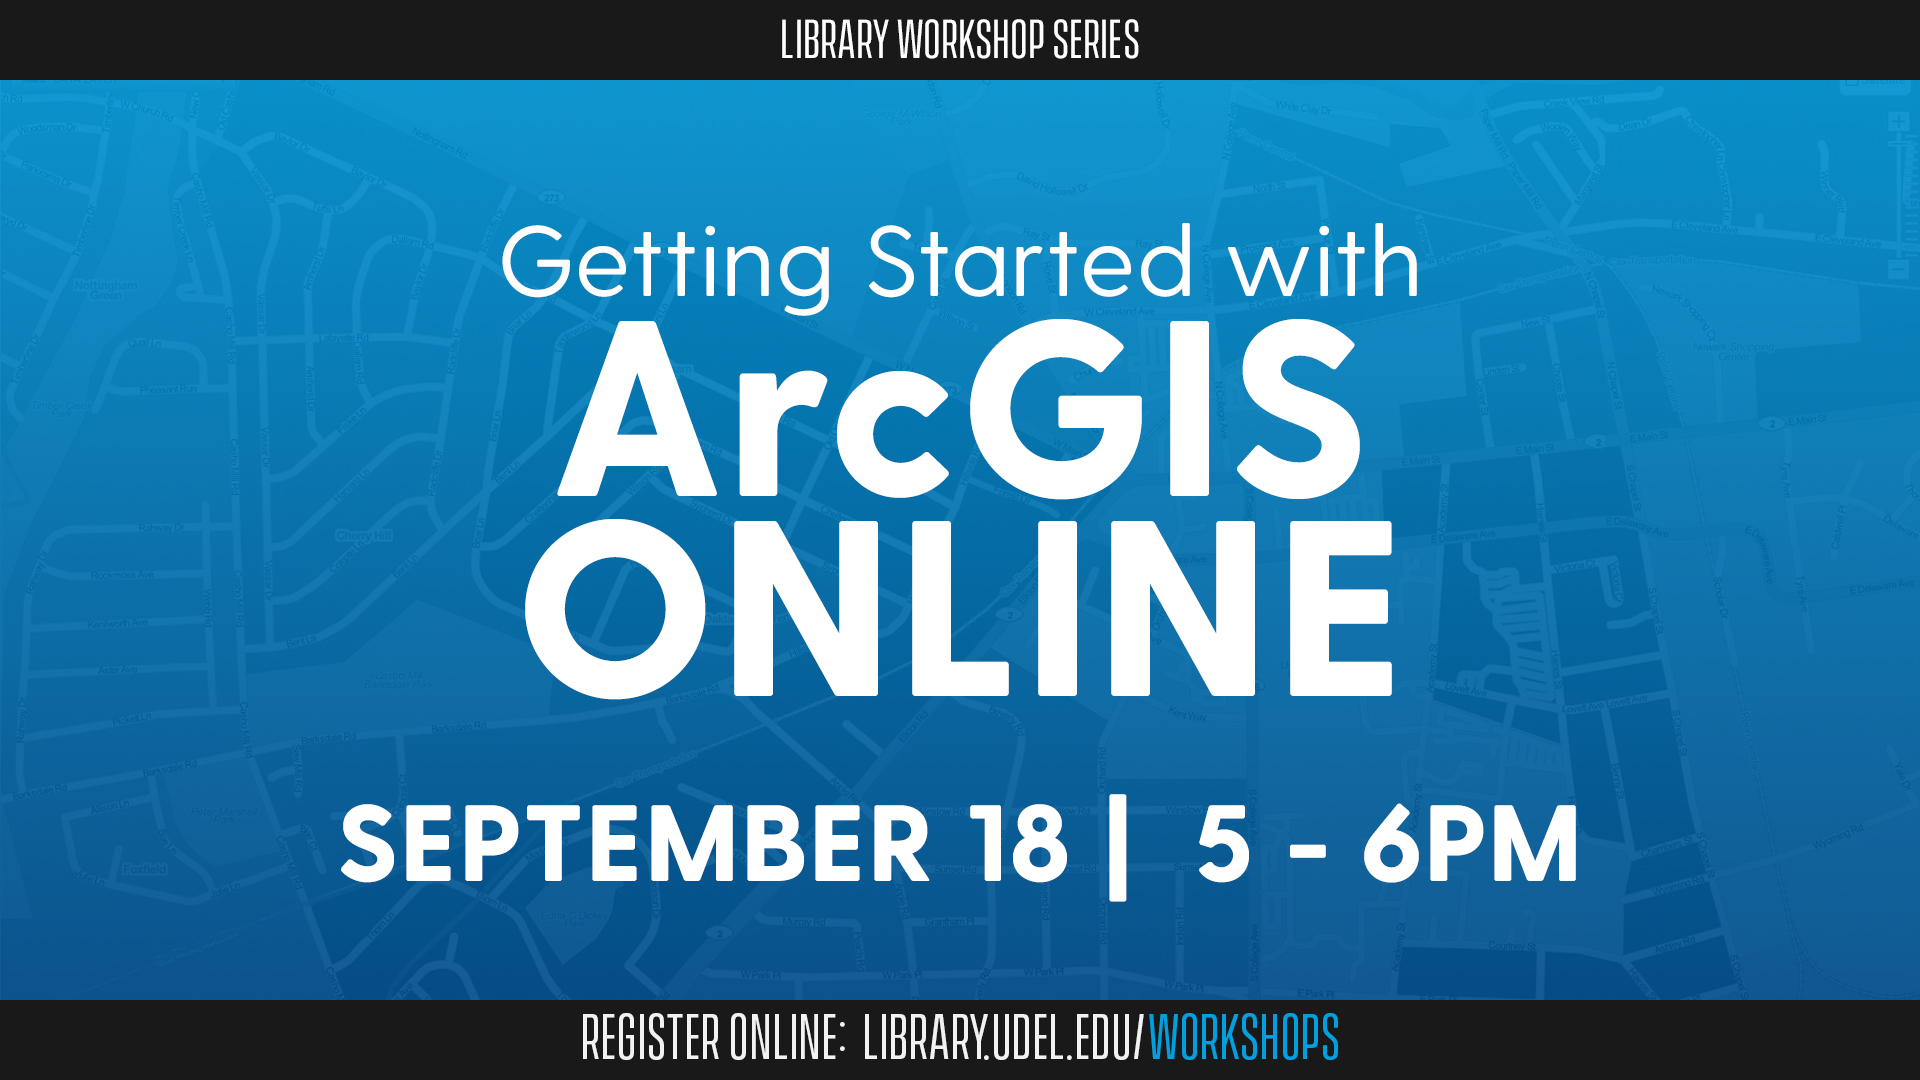 Getting Started with ArcGIS Online